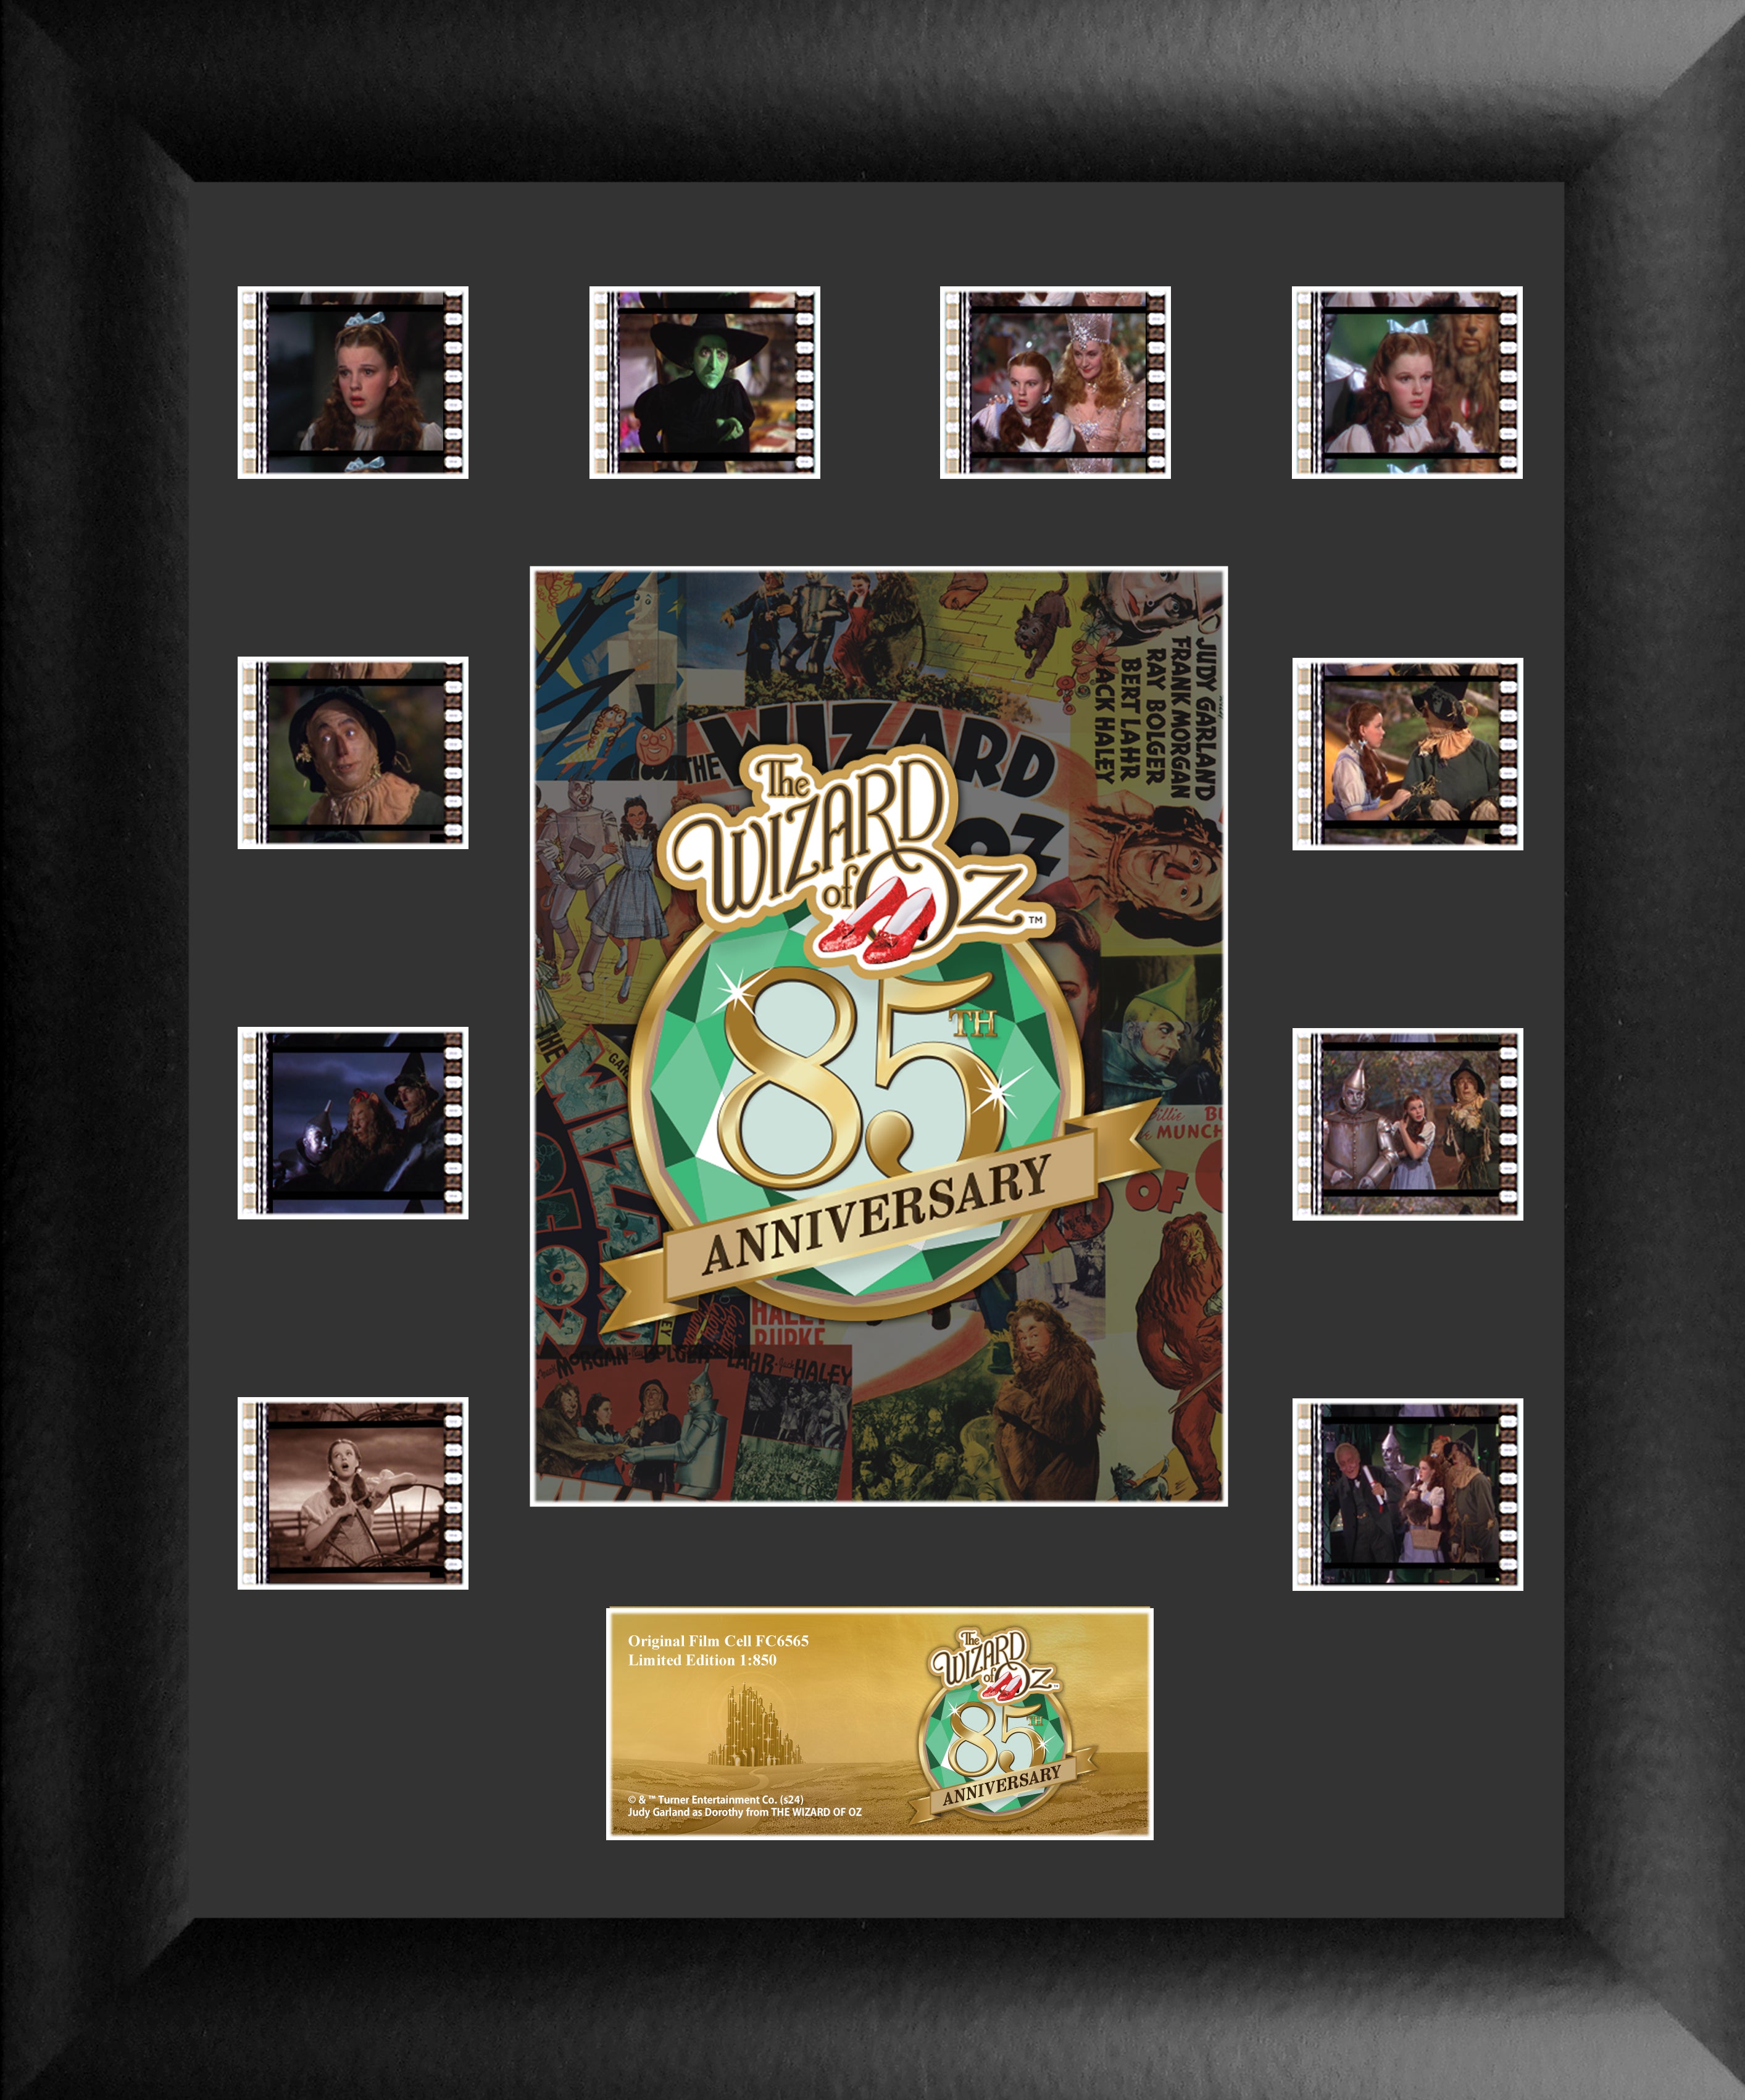 The Wizard of Oz (85th Anniversary – Official Logo) FilmCells Presentation Mini Montage Framed Art USFC6565